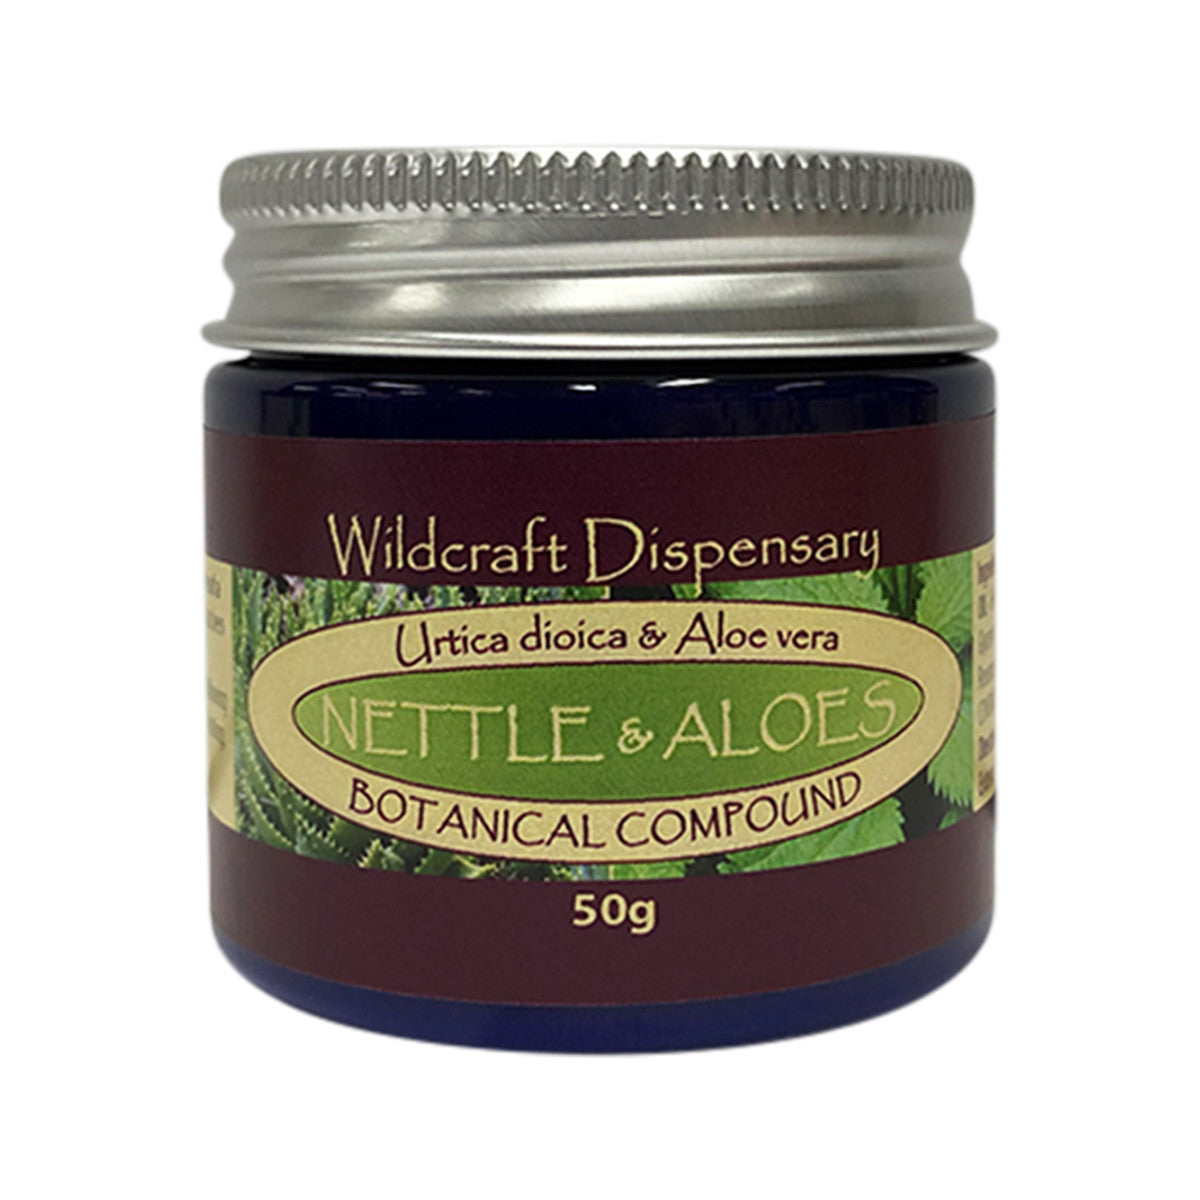 Wildcraft Dispensary Nettle and Aloes Ointment 50g